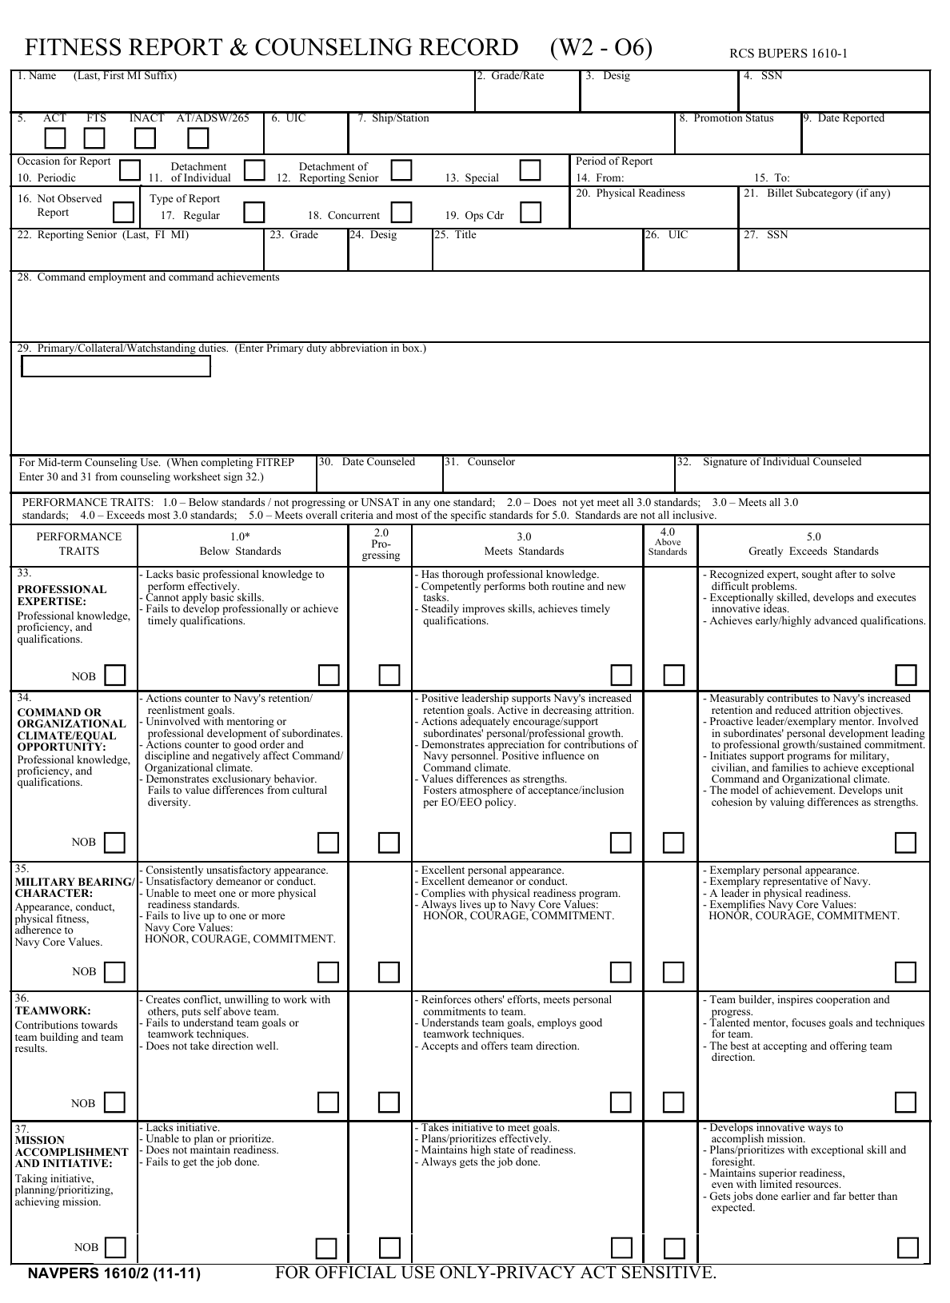 NAVPERS Form 1610/2 Fill Out Sign Online and Download Fillable PDF